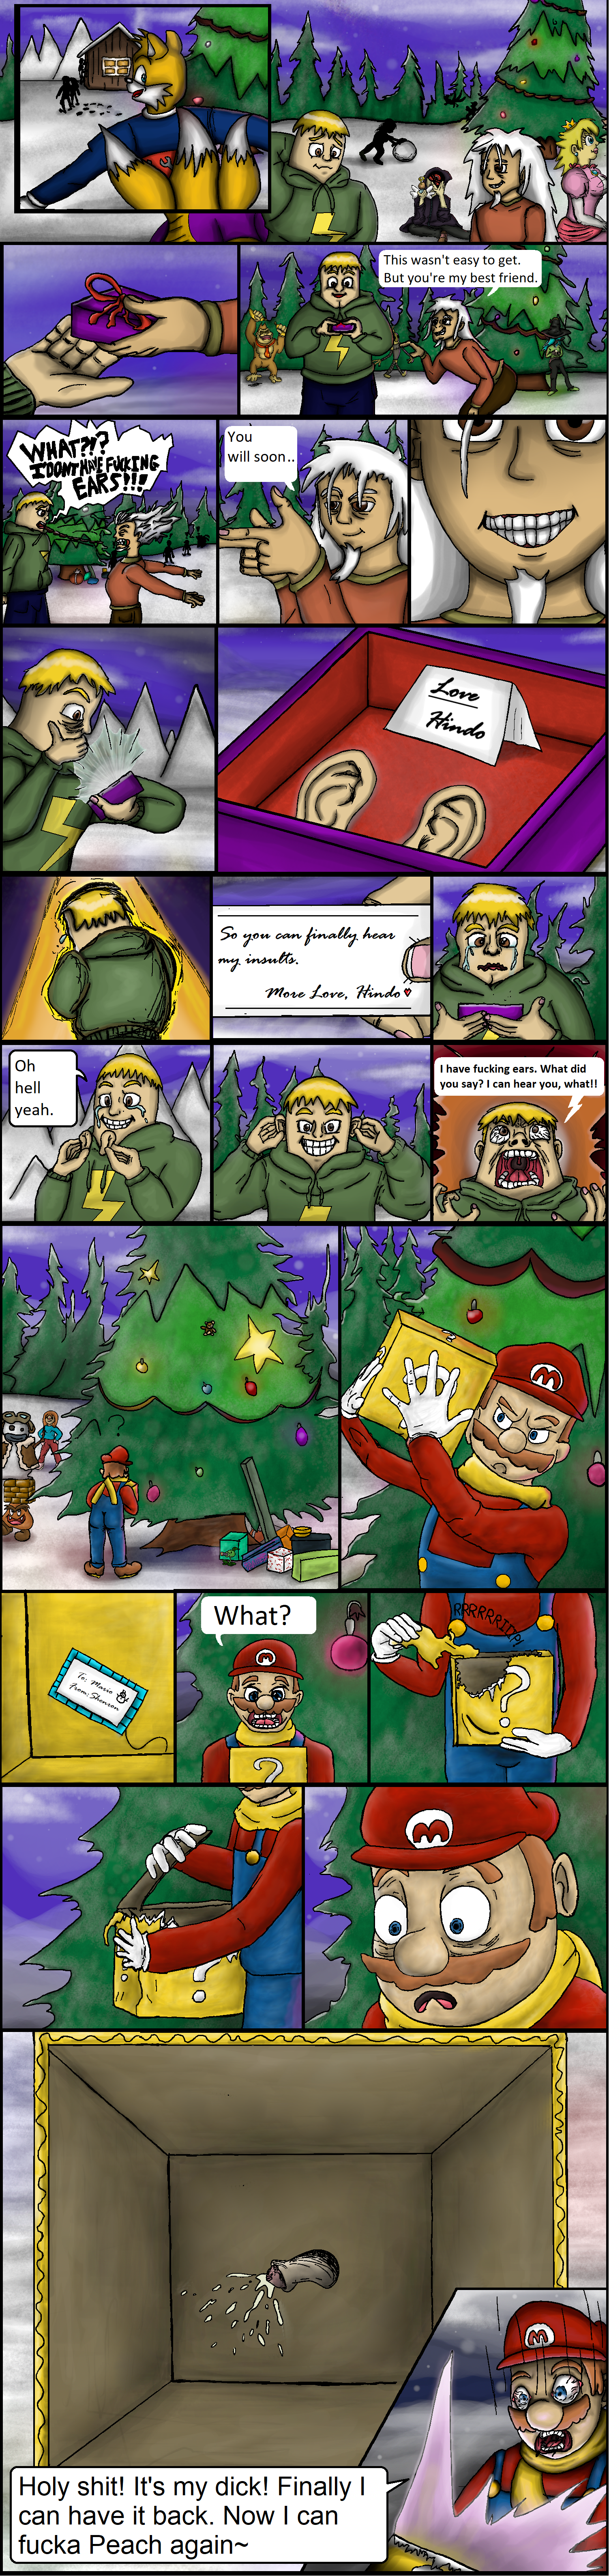 xmas/pg3.png. If you're seeing this, enable images. If you have them enabled, email commodorian@tailsgetstrolled.org with a detailed description of how you got here. (Screenshots help!)